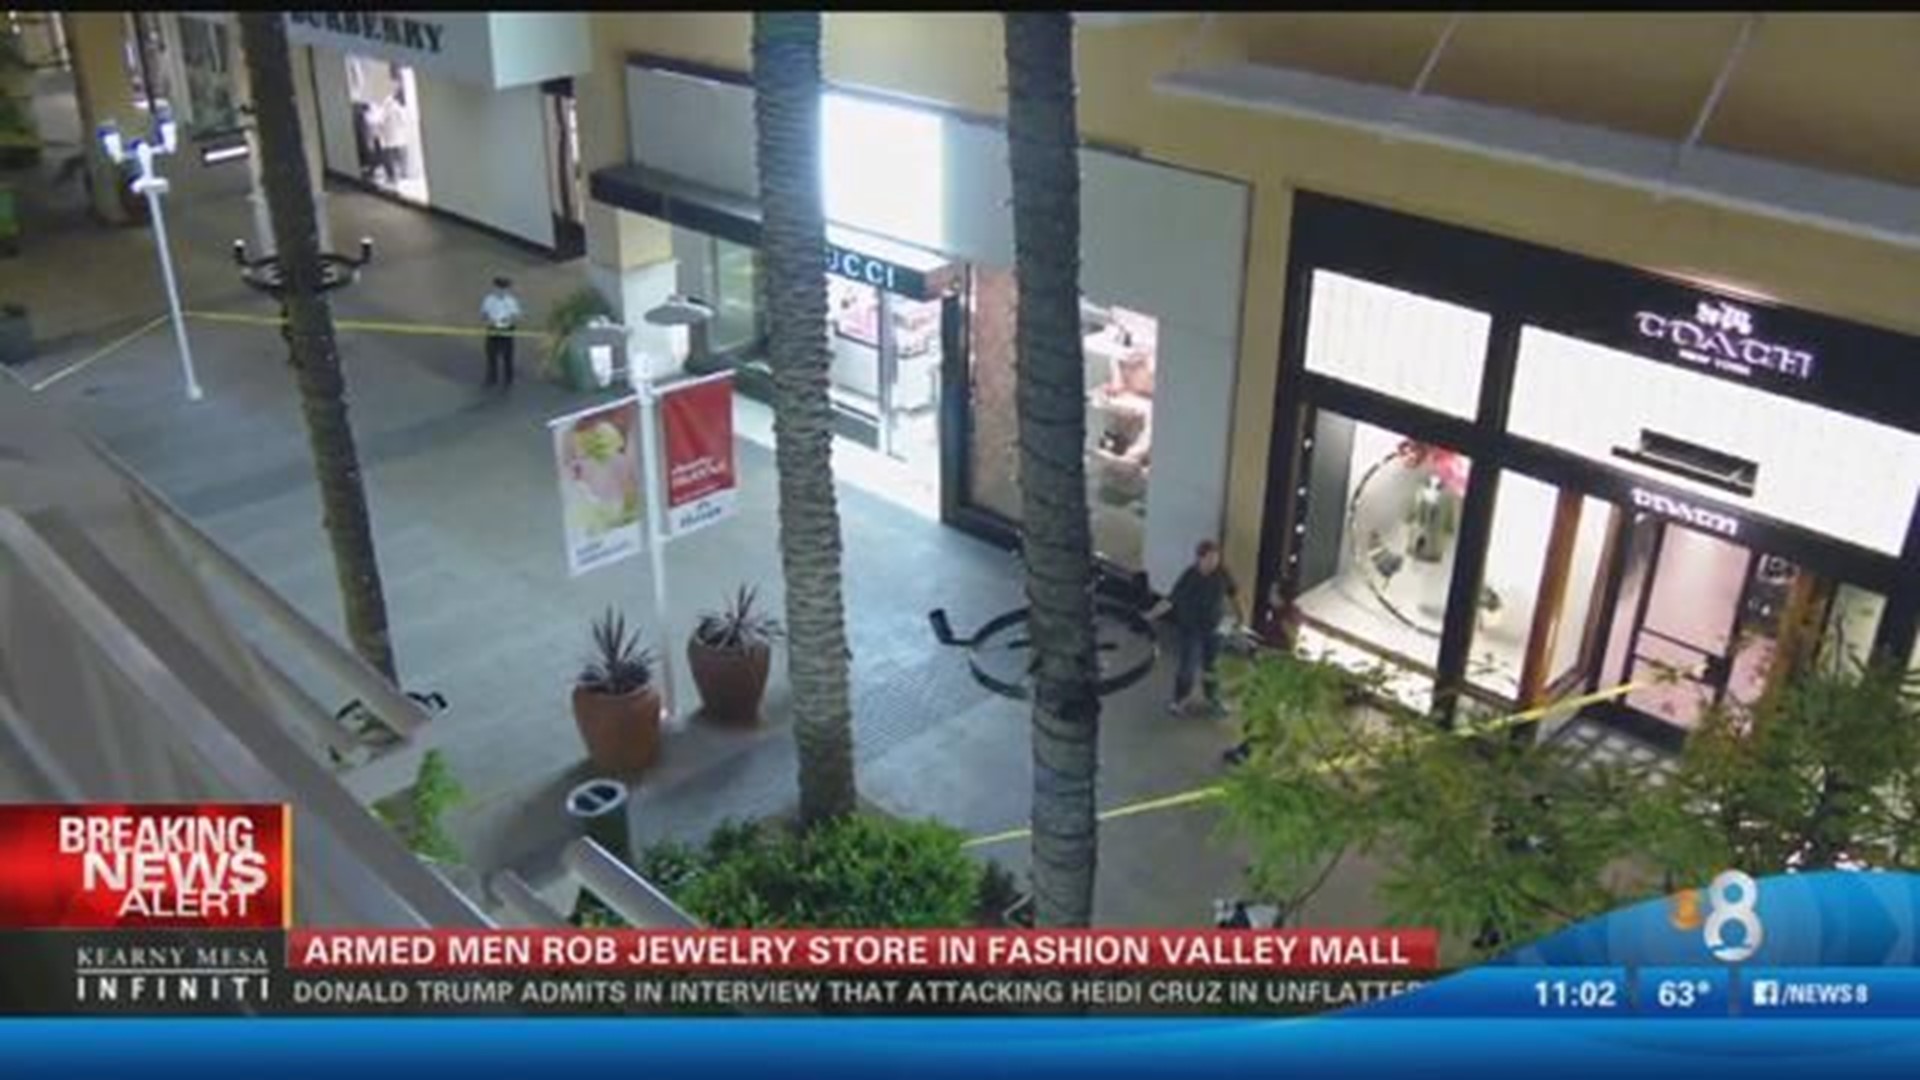 Armed men rob jewelry store in Fashion Valley Mall